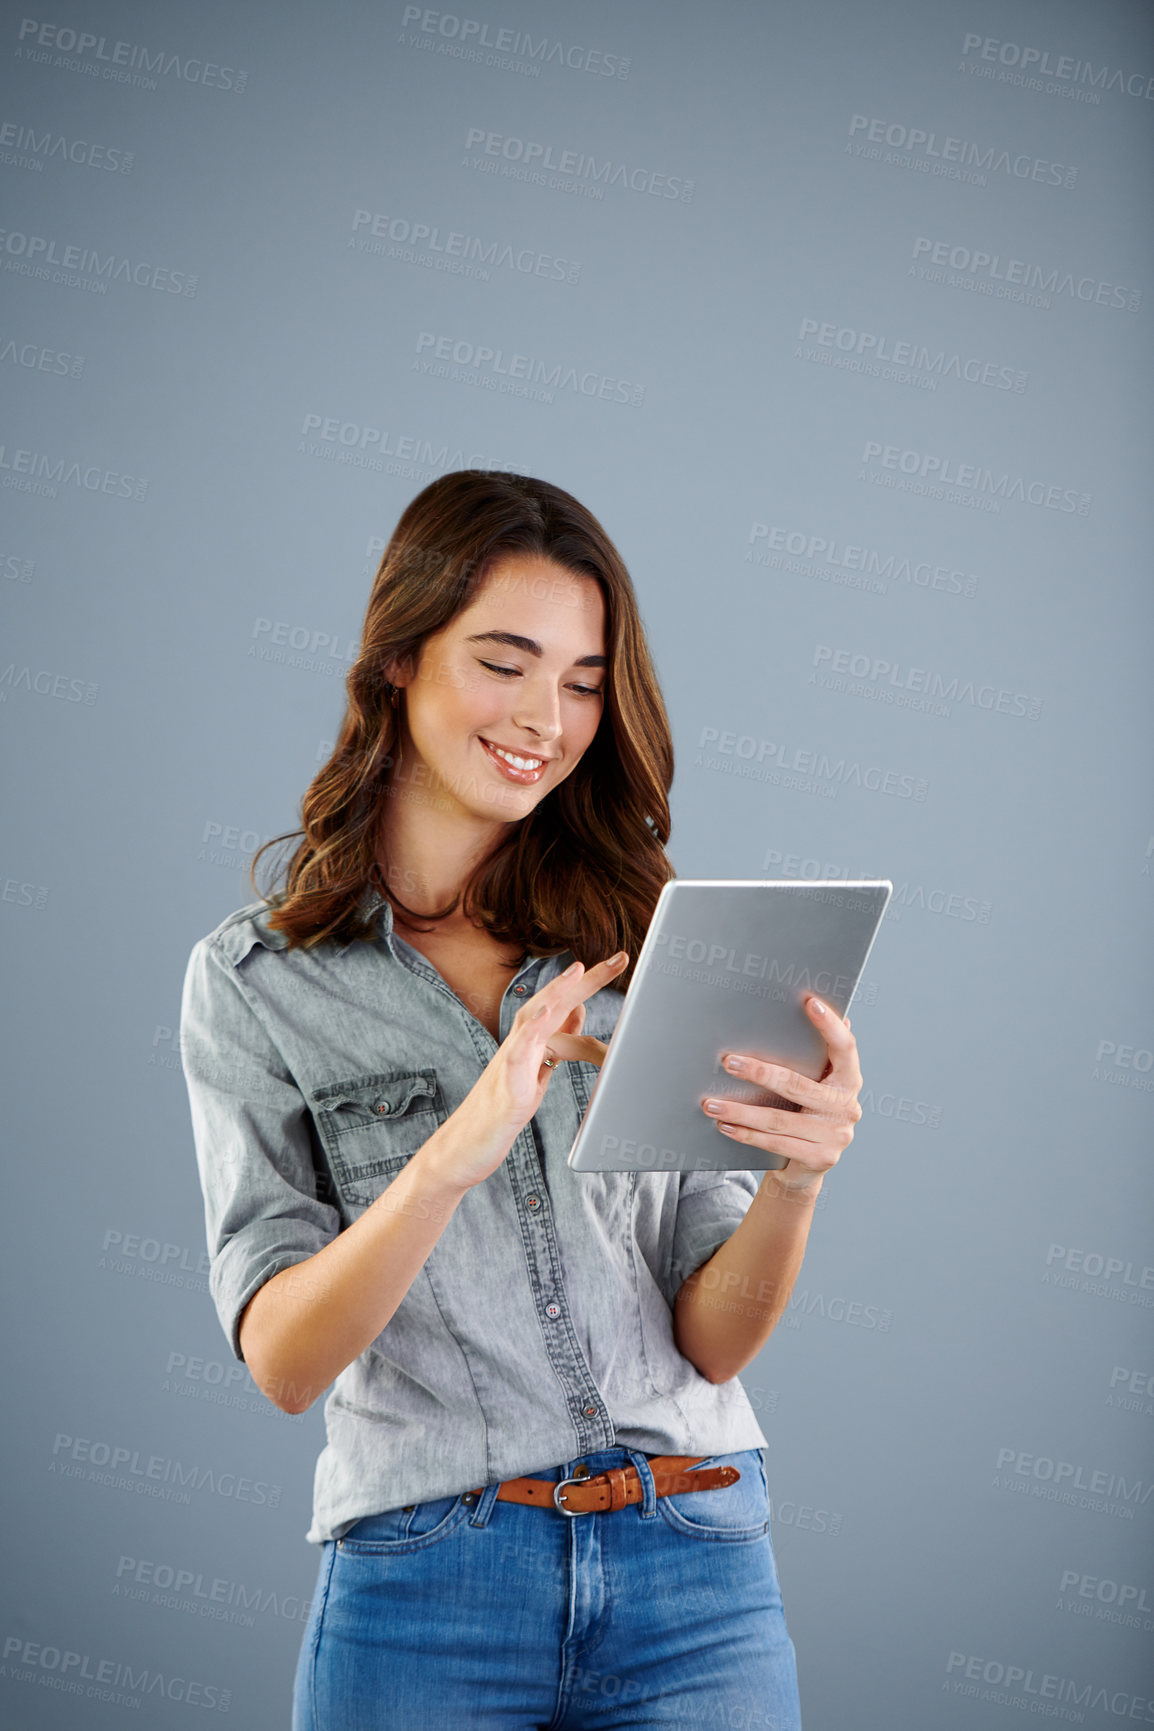 Buy stock photo Studio shot of an attractive young woman using her digital tablet against a grey background